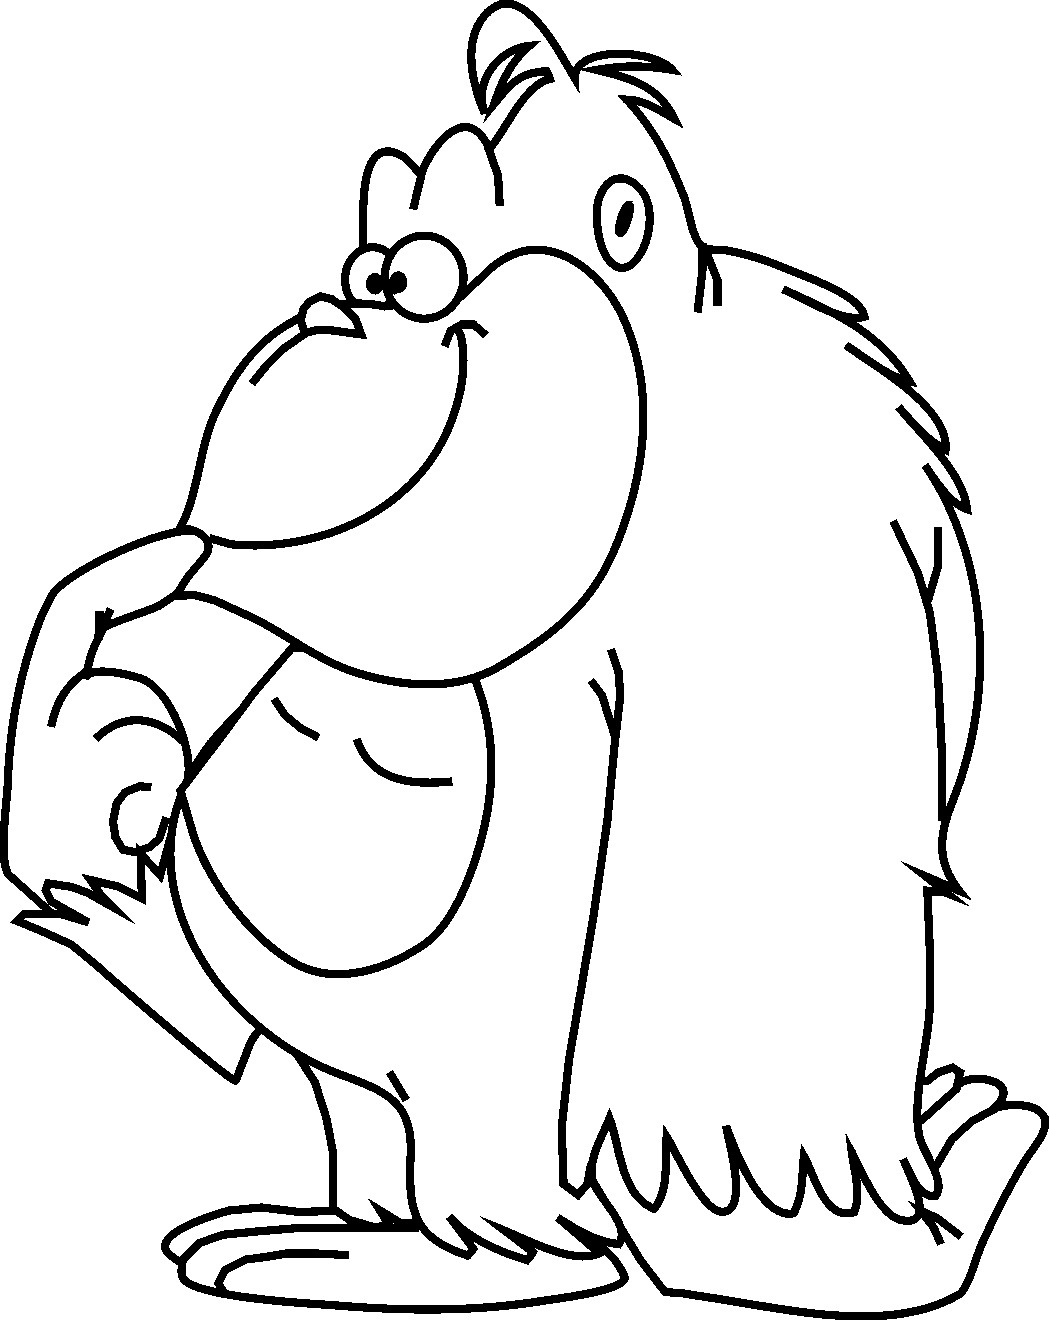 Animals Coloring Pages To Print
 animal cartoon coloring pages